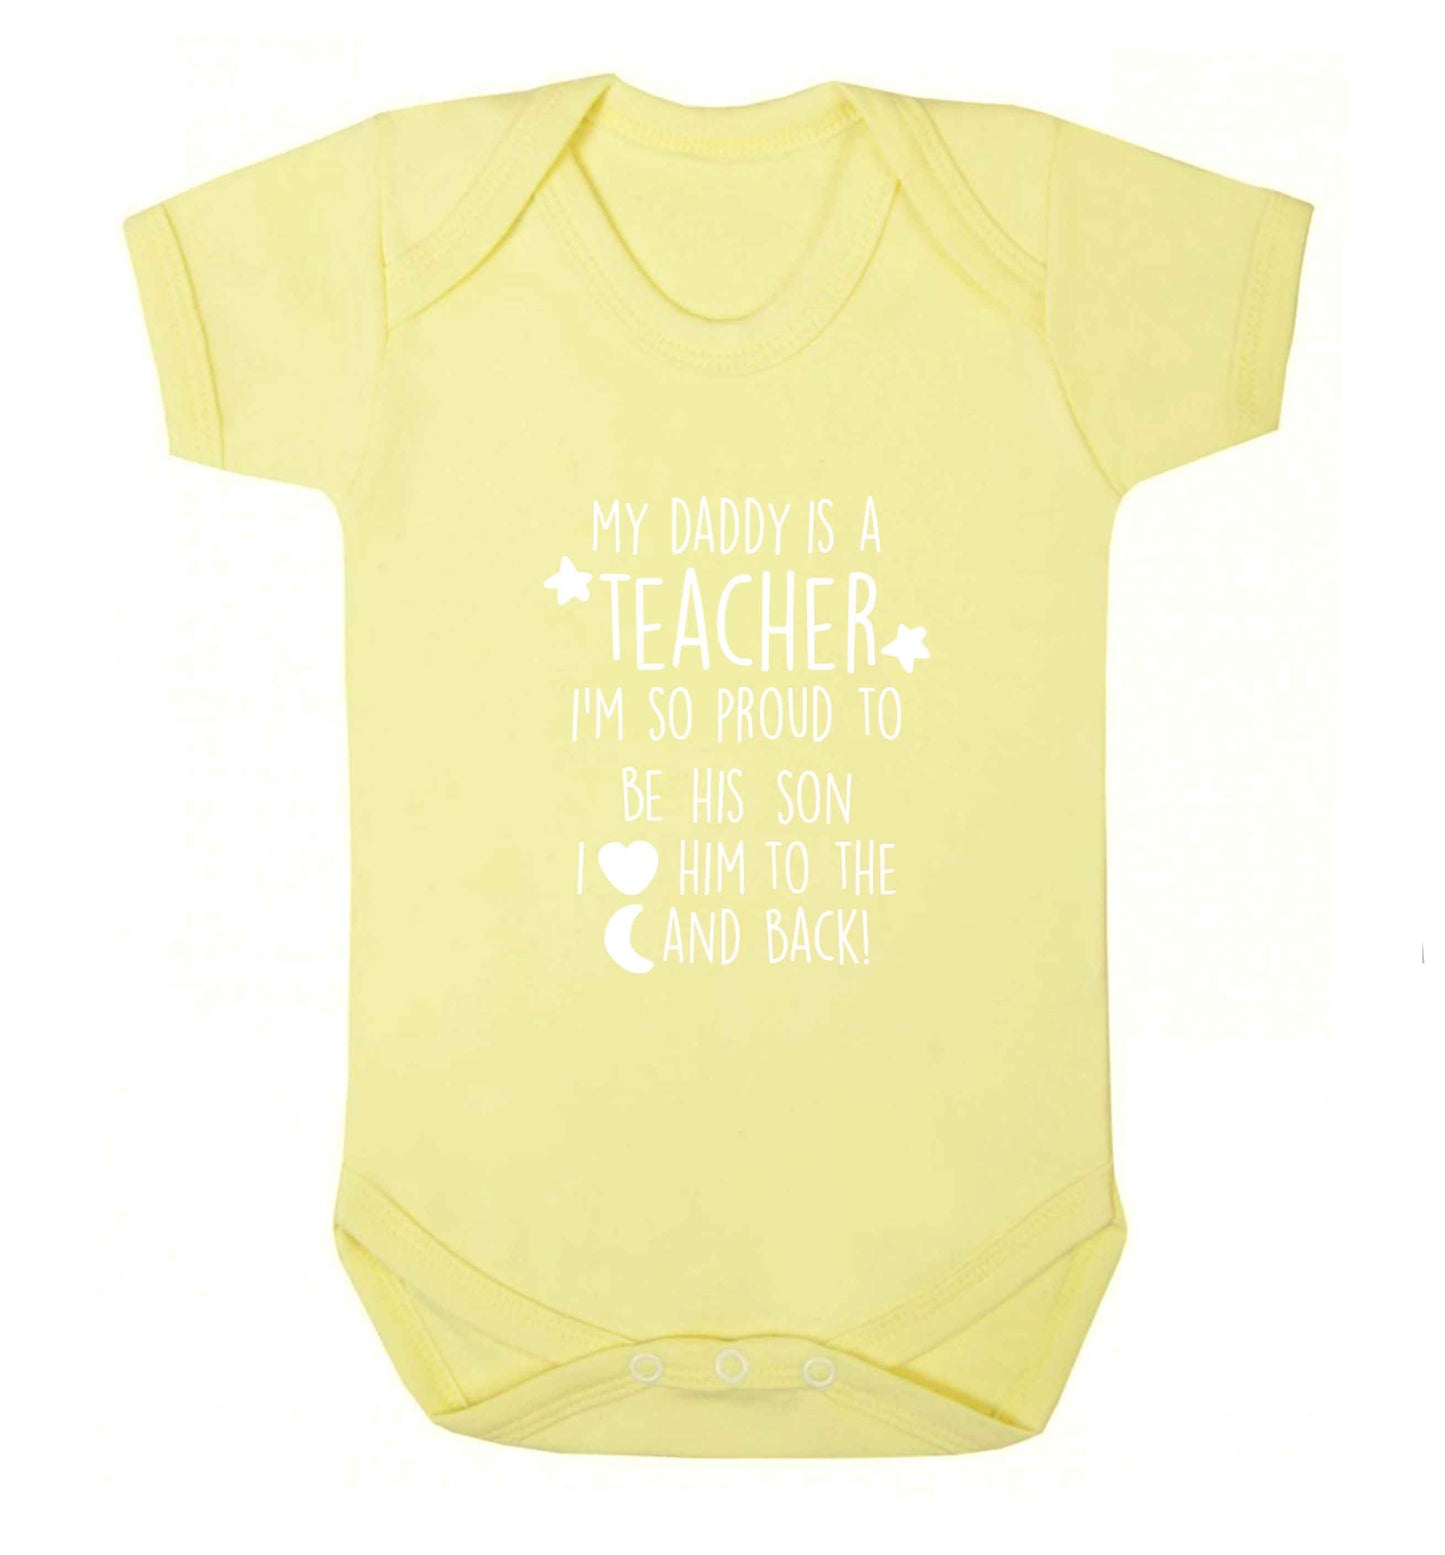 My daddy is a teacher I'm so proud to be his son I love her to the moon and back baby vest pale yellow 18-24 months